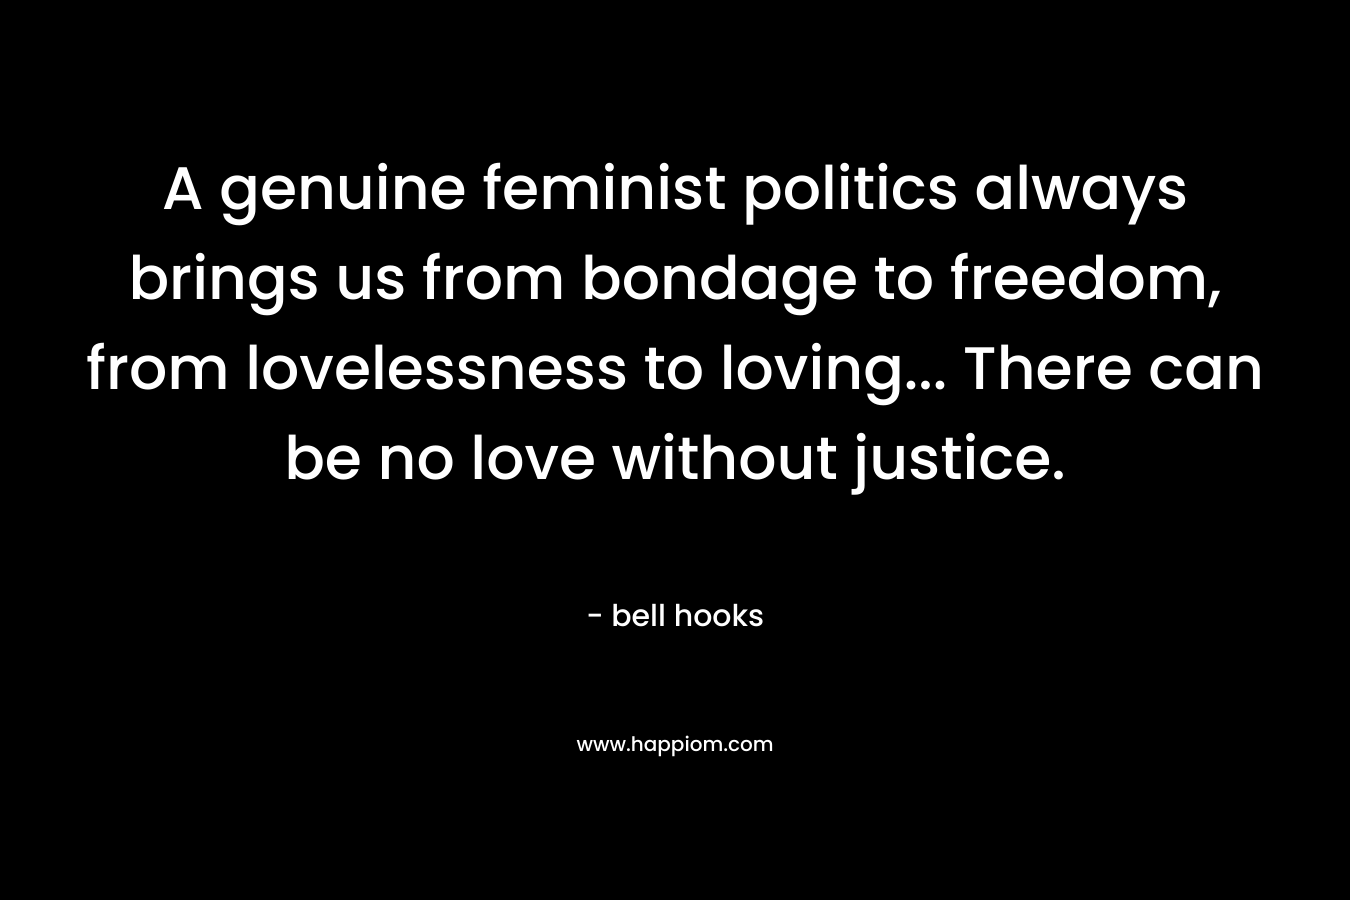 A genuine feminist politics always brings us from bondage to freedom, from lovelessness to loving… There can be no love without justice. – bell hooks